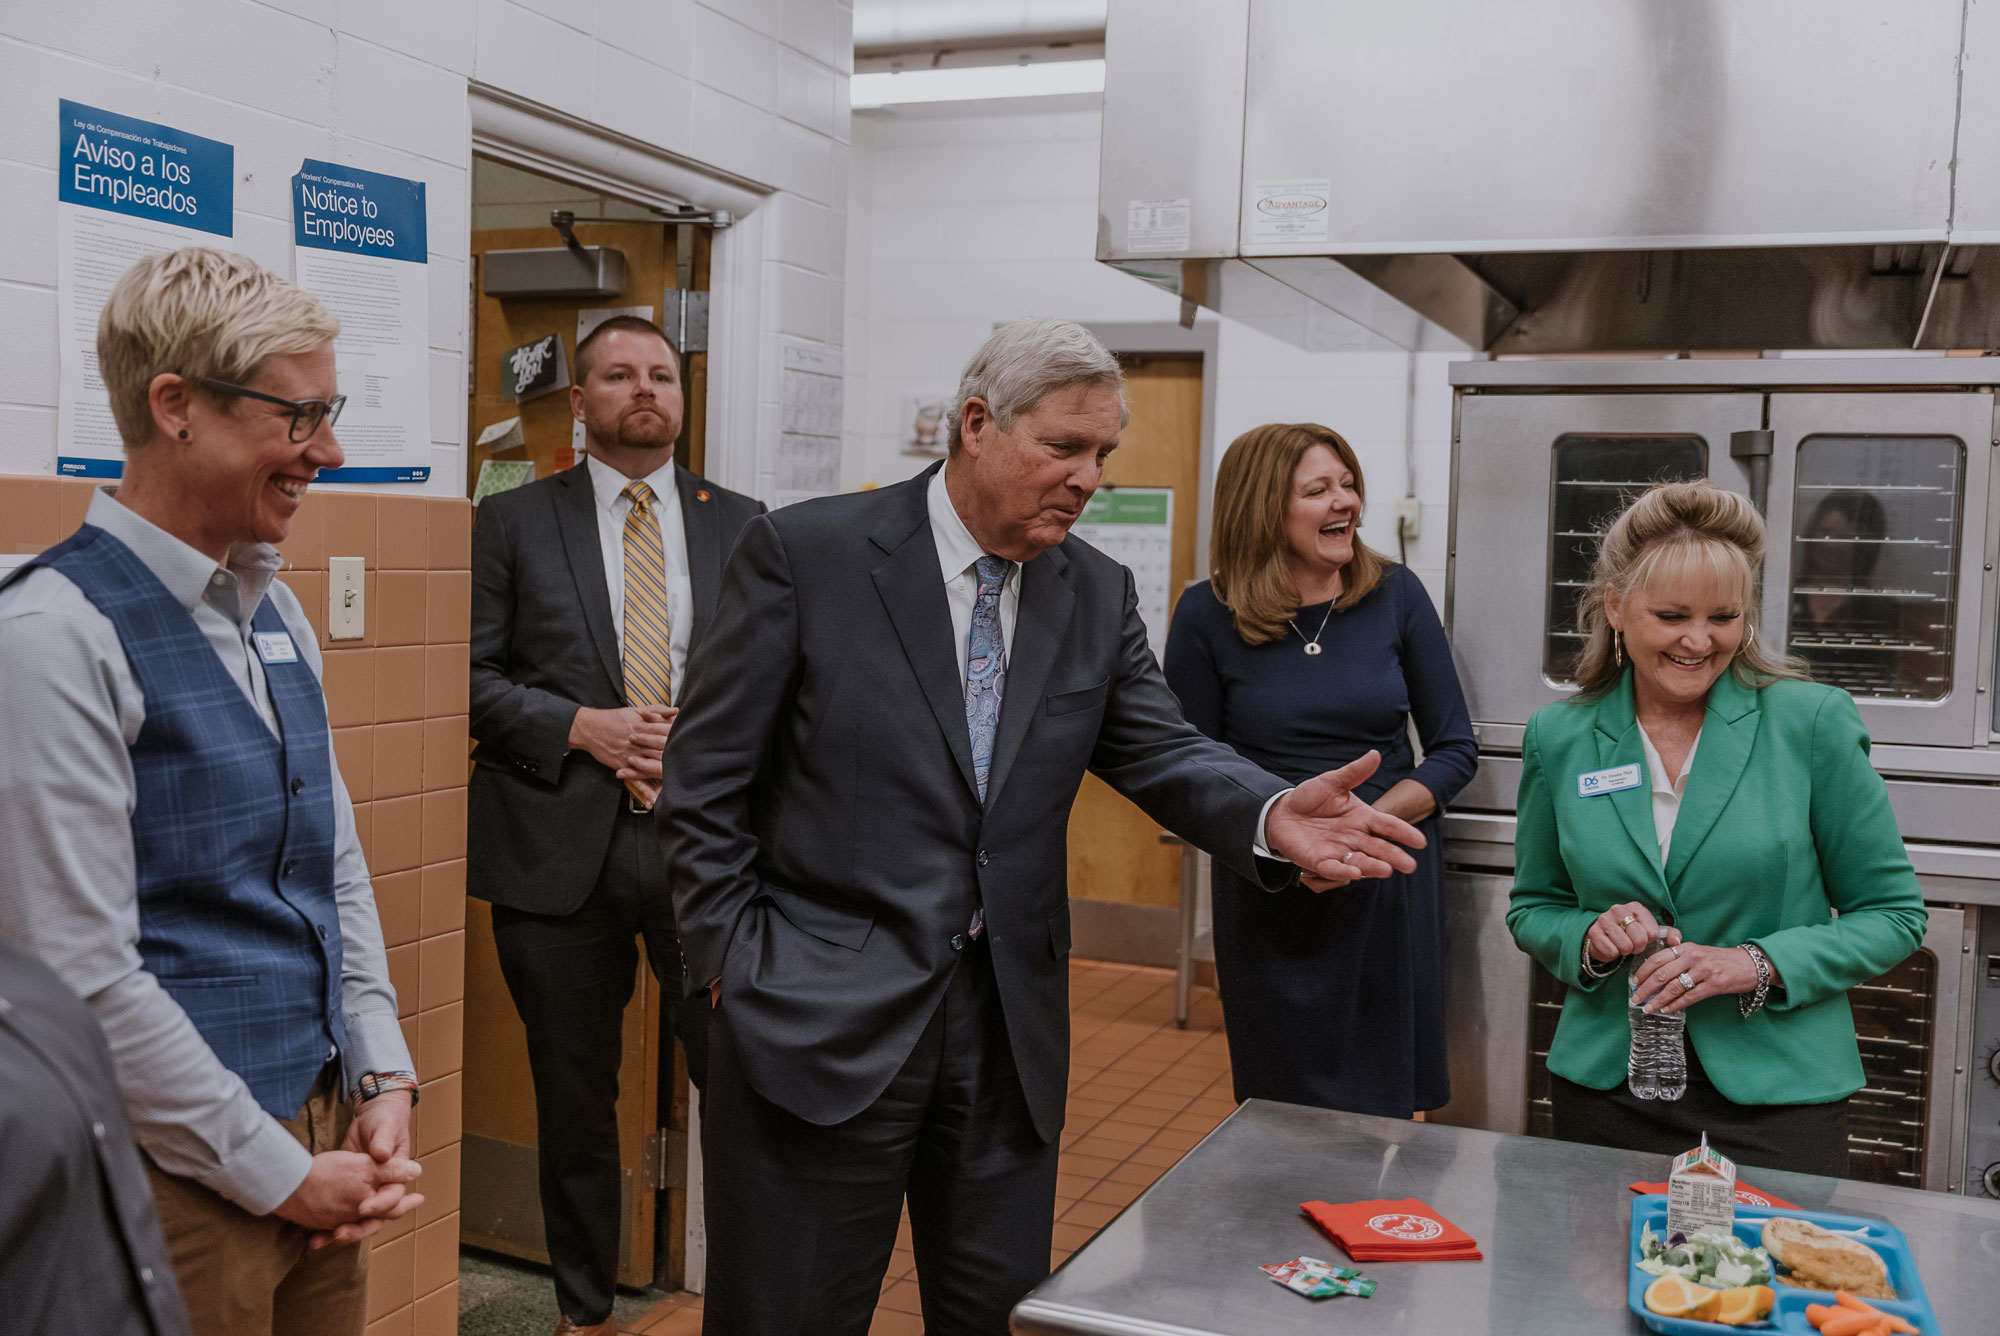 Danielle Bock, Greeley Evans Director of Nutrition Services; Melissa Rothstein, USDA Associate Administrator for Child Nutrition; Dr. Deirdre Pilch, Greeley Evans Superintendent and Secretary Tom Vilsack observe a school meal tray in the Maplewood Elementary School kitchen